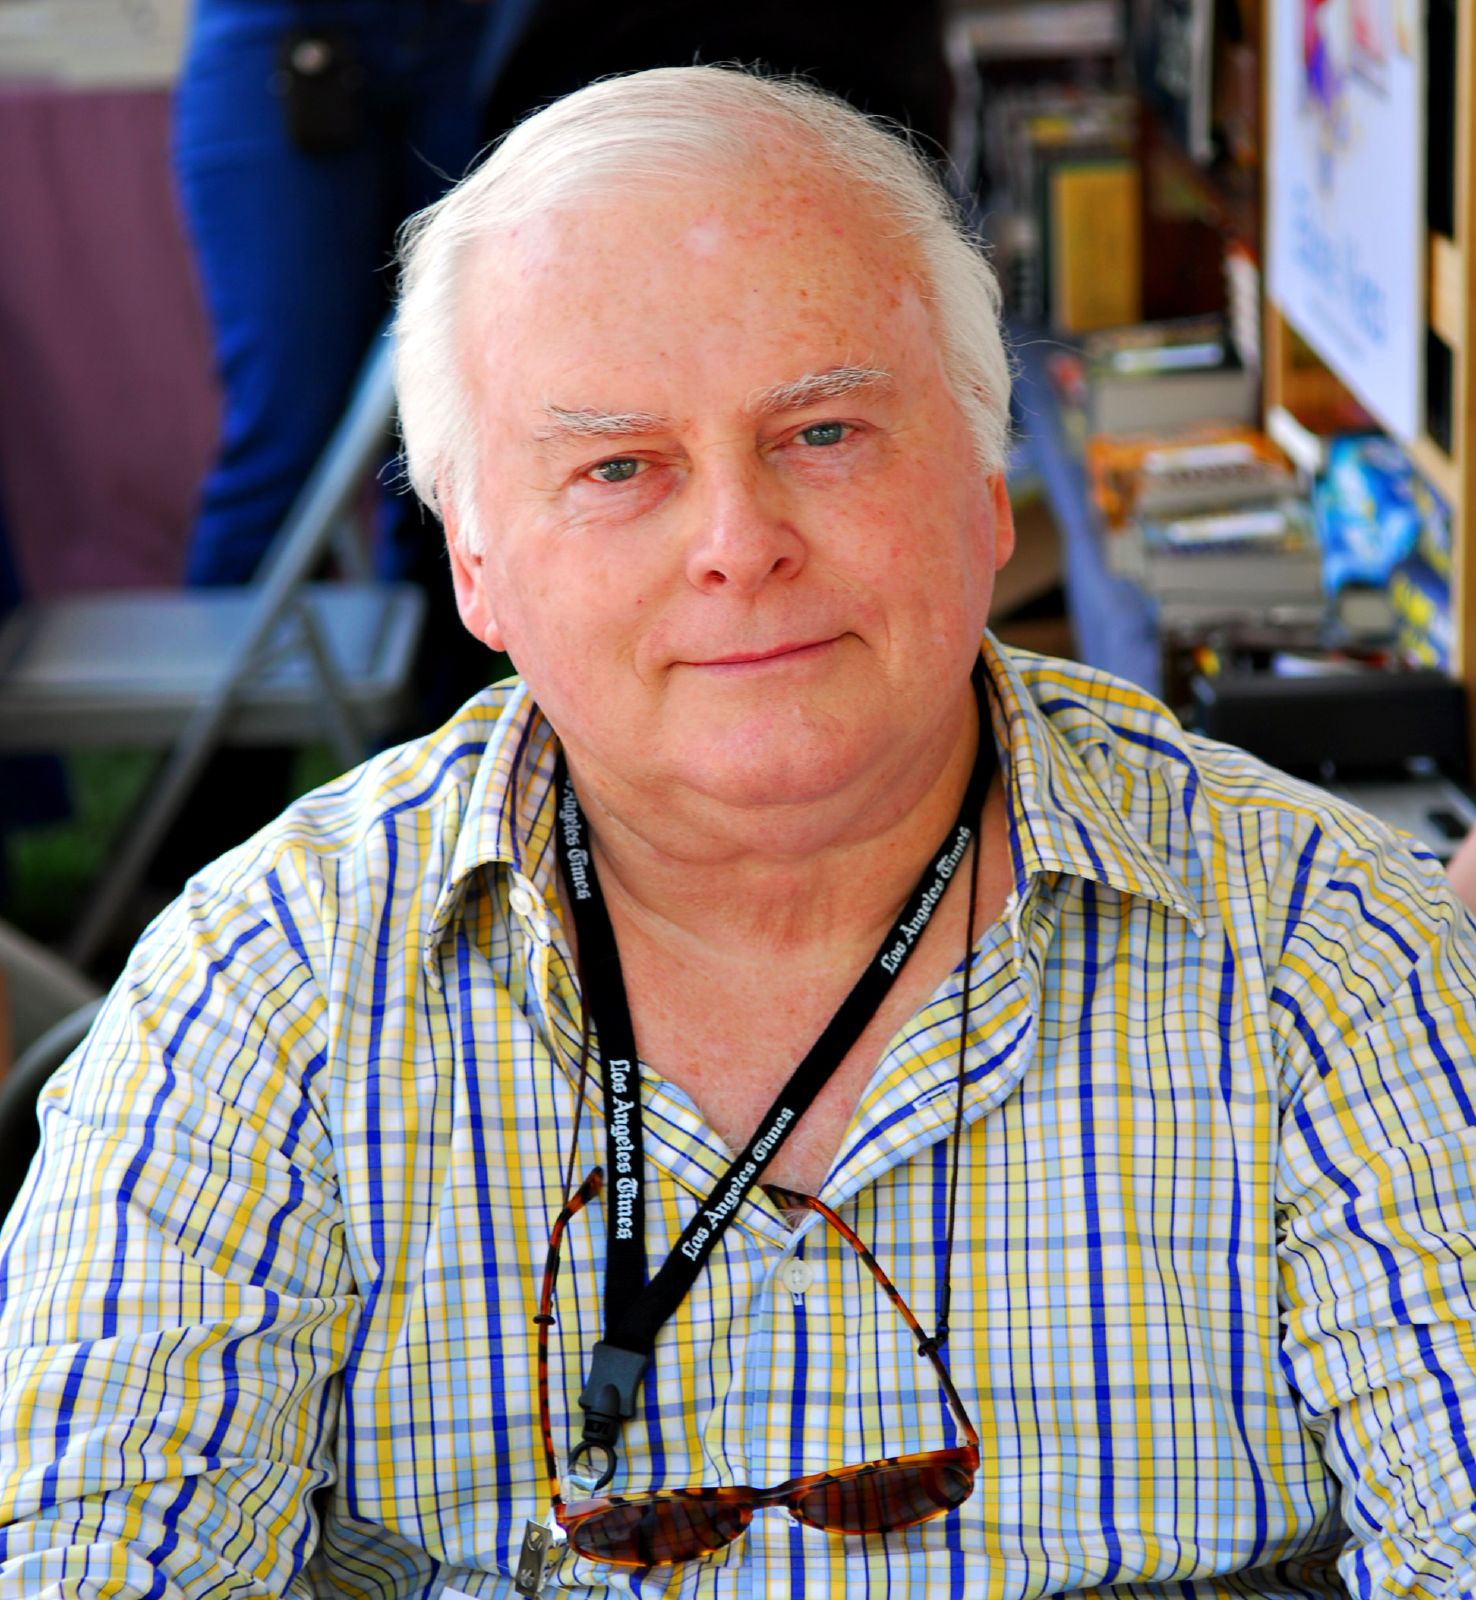 Woods at the [[Los Angeles Times Festival of Books|''Los Angeles Times'' Festival of Books]] in 2008